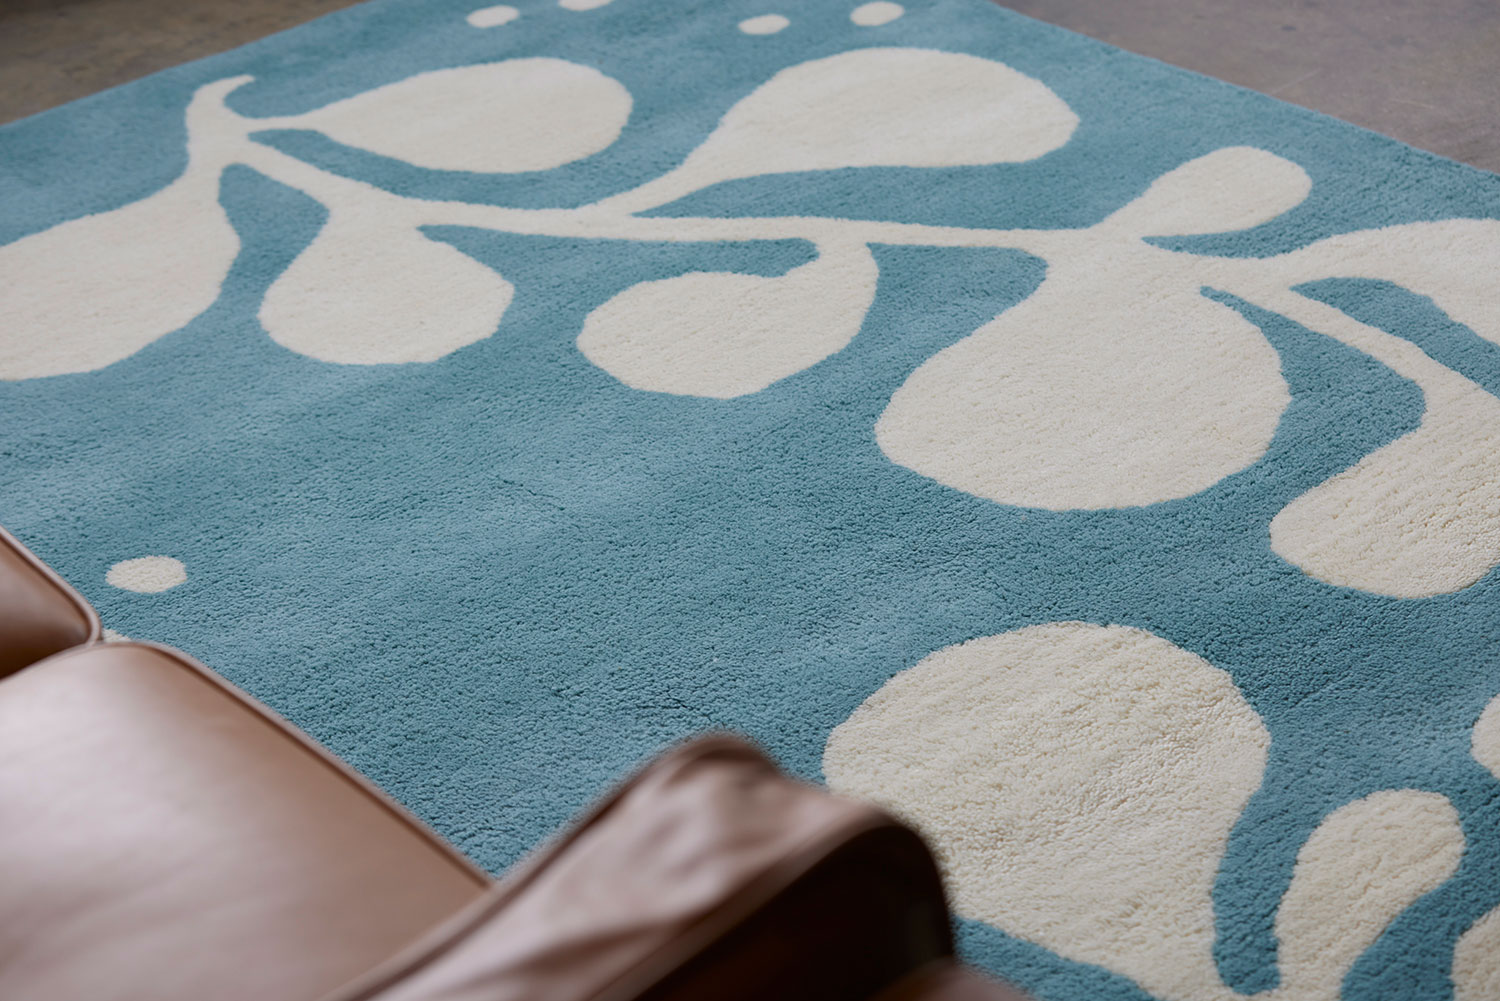 A brown leather chair sits on a neutral and blue area rug with abstract designs on it called Vine Hush